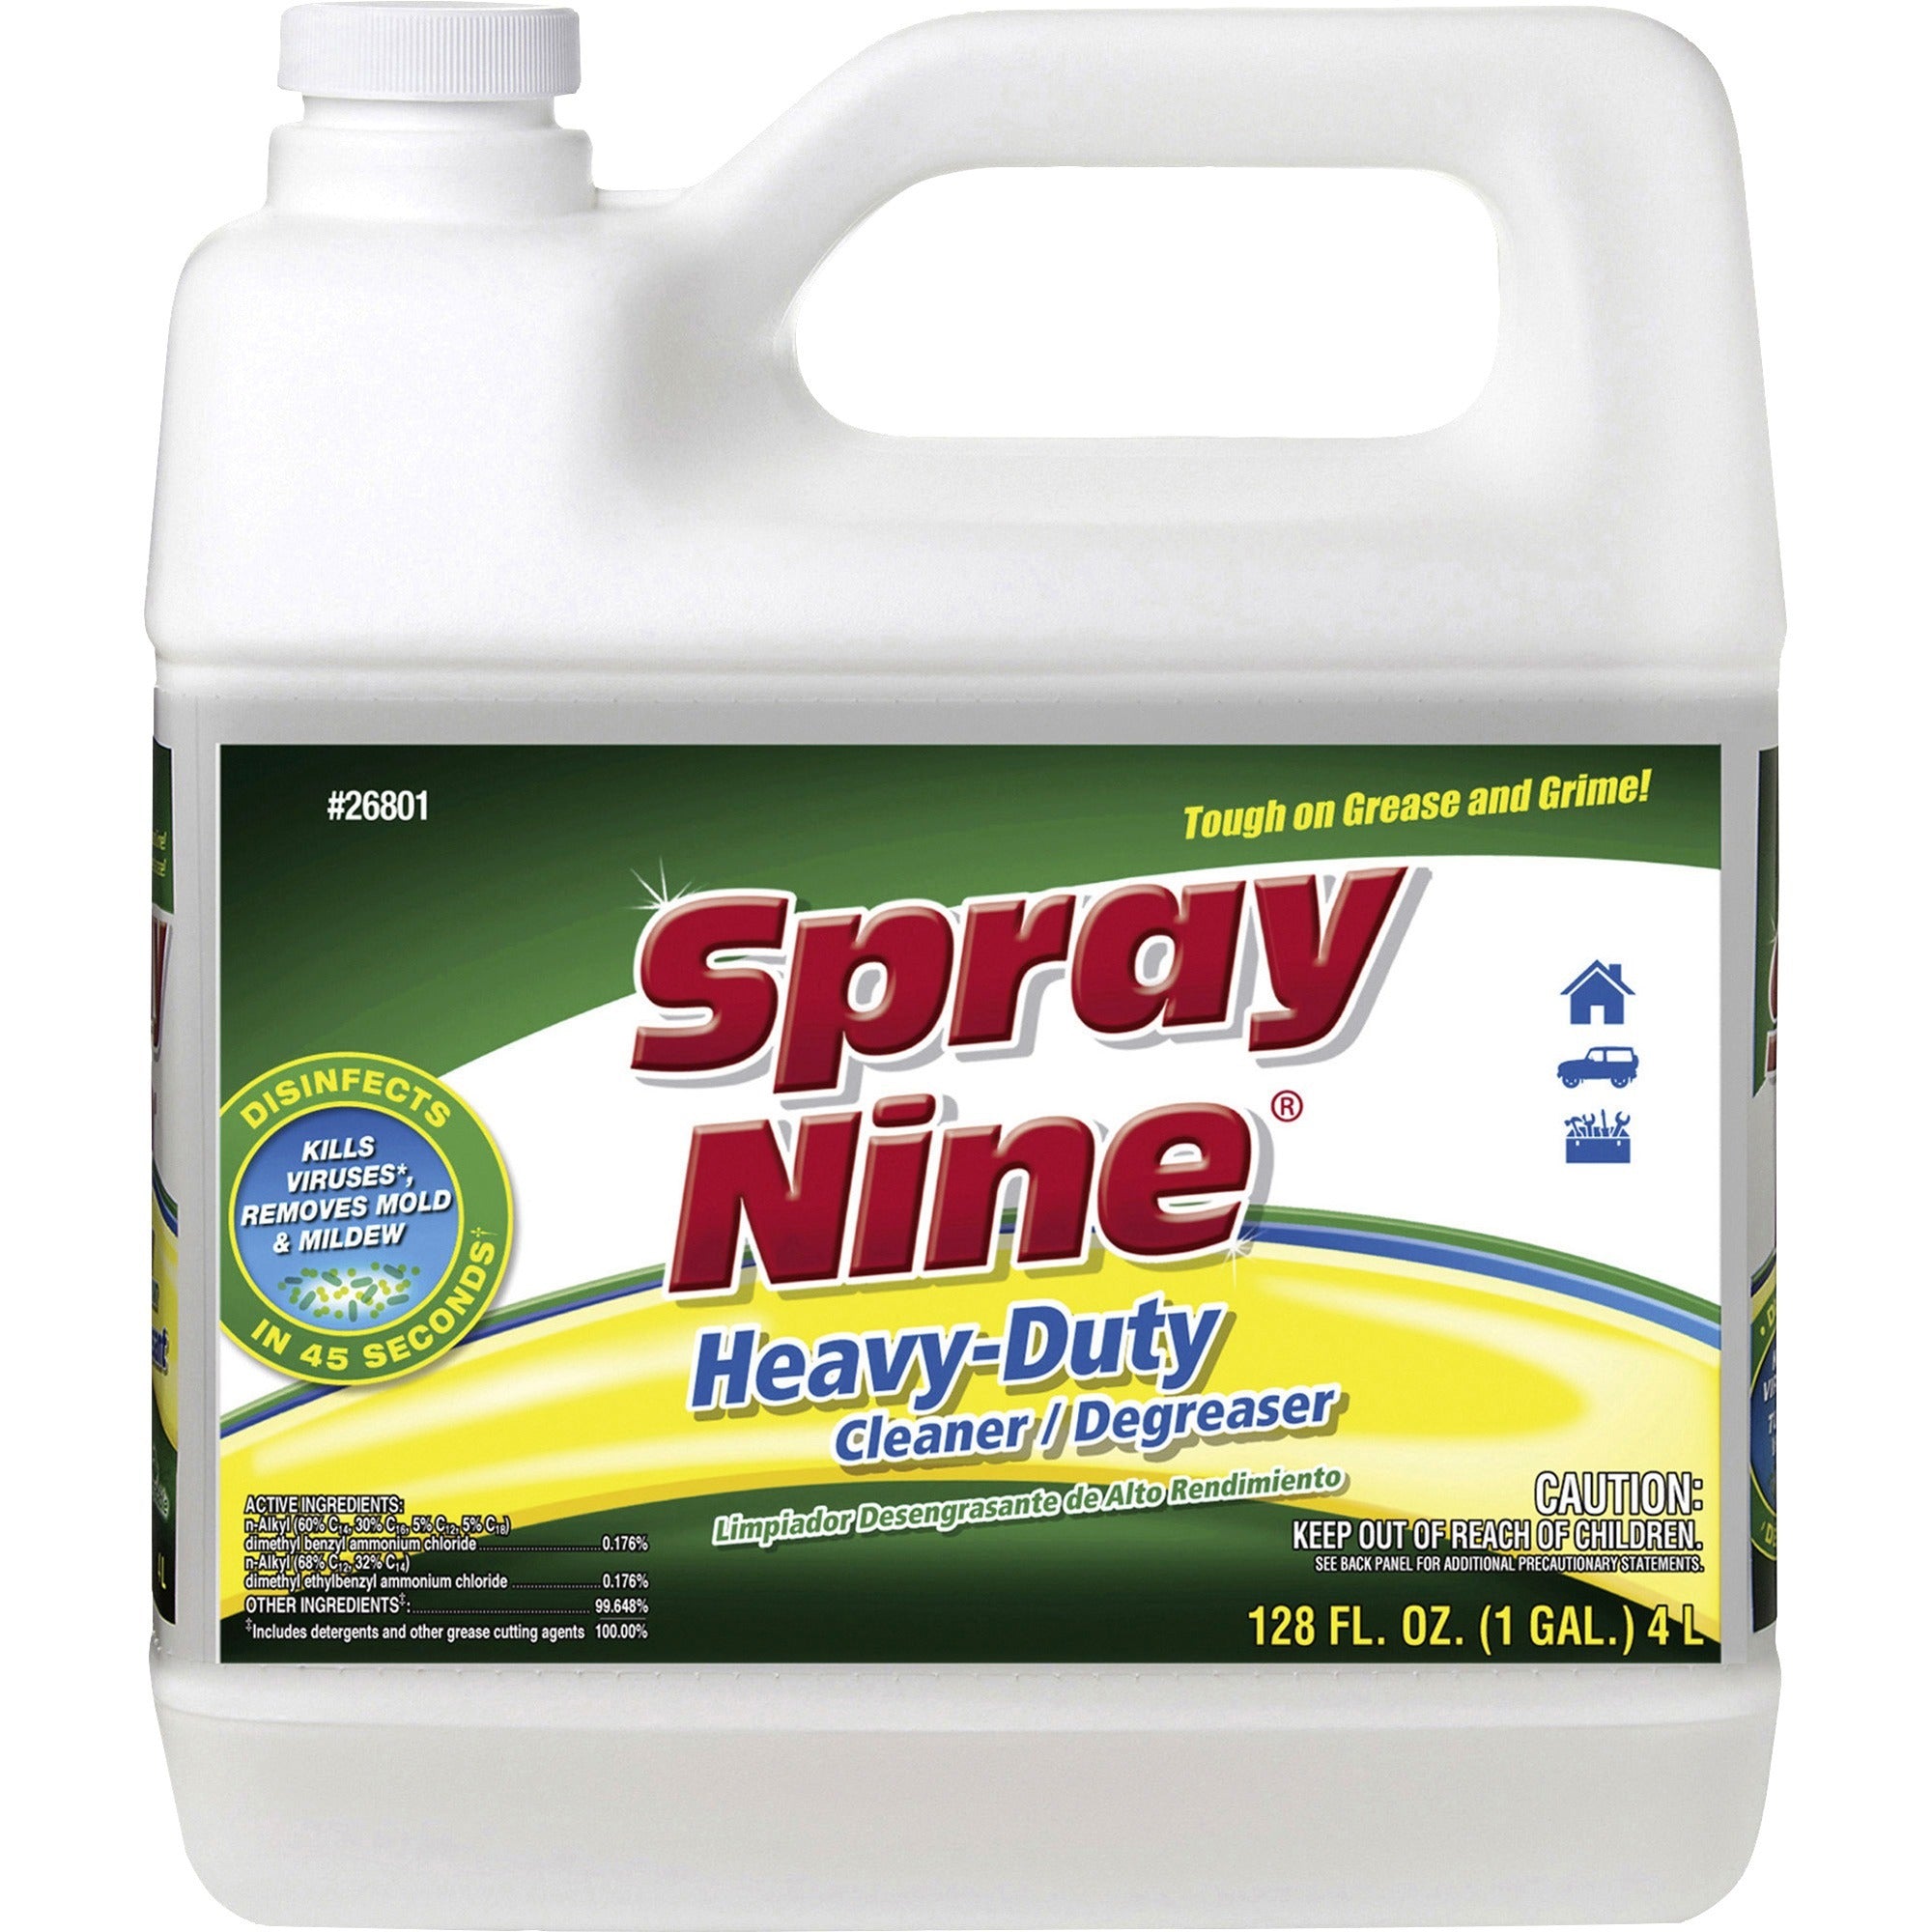 spray-nine-heavy-duty-cleaner-degreaser-w-disinfectant-for-multi-surface-128-fl-oz-4-quart-4-carton-disinfectant-clear_ptx26801ct - 2